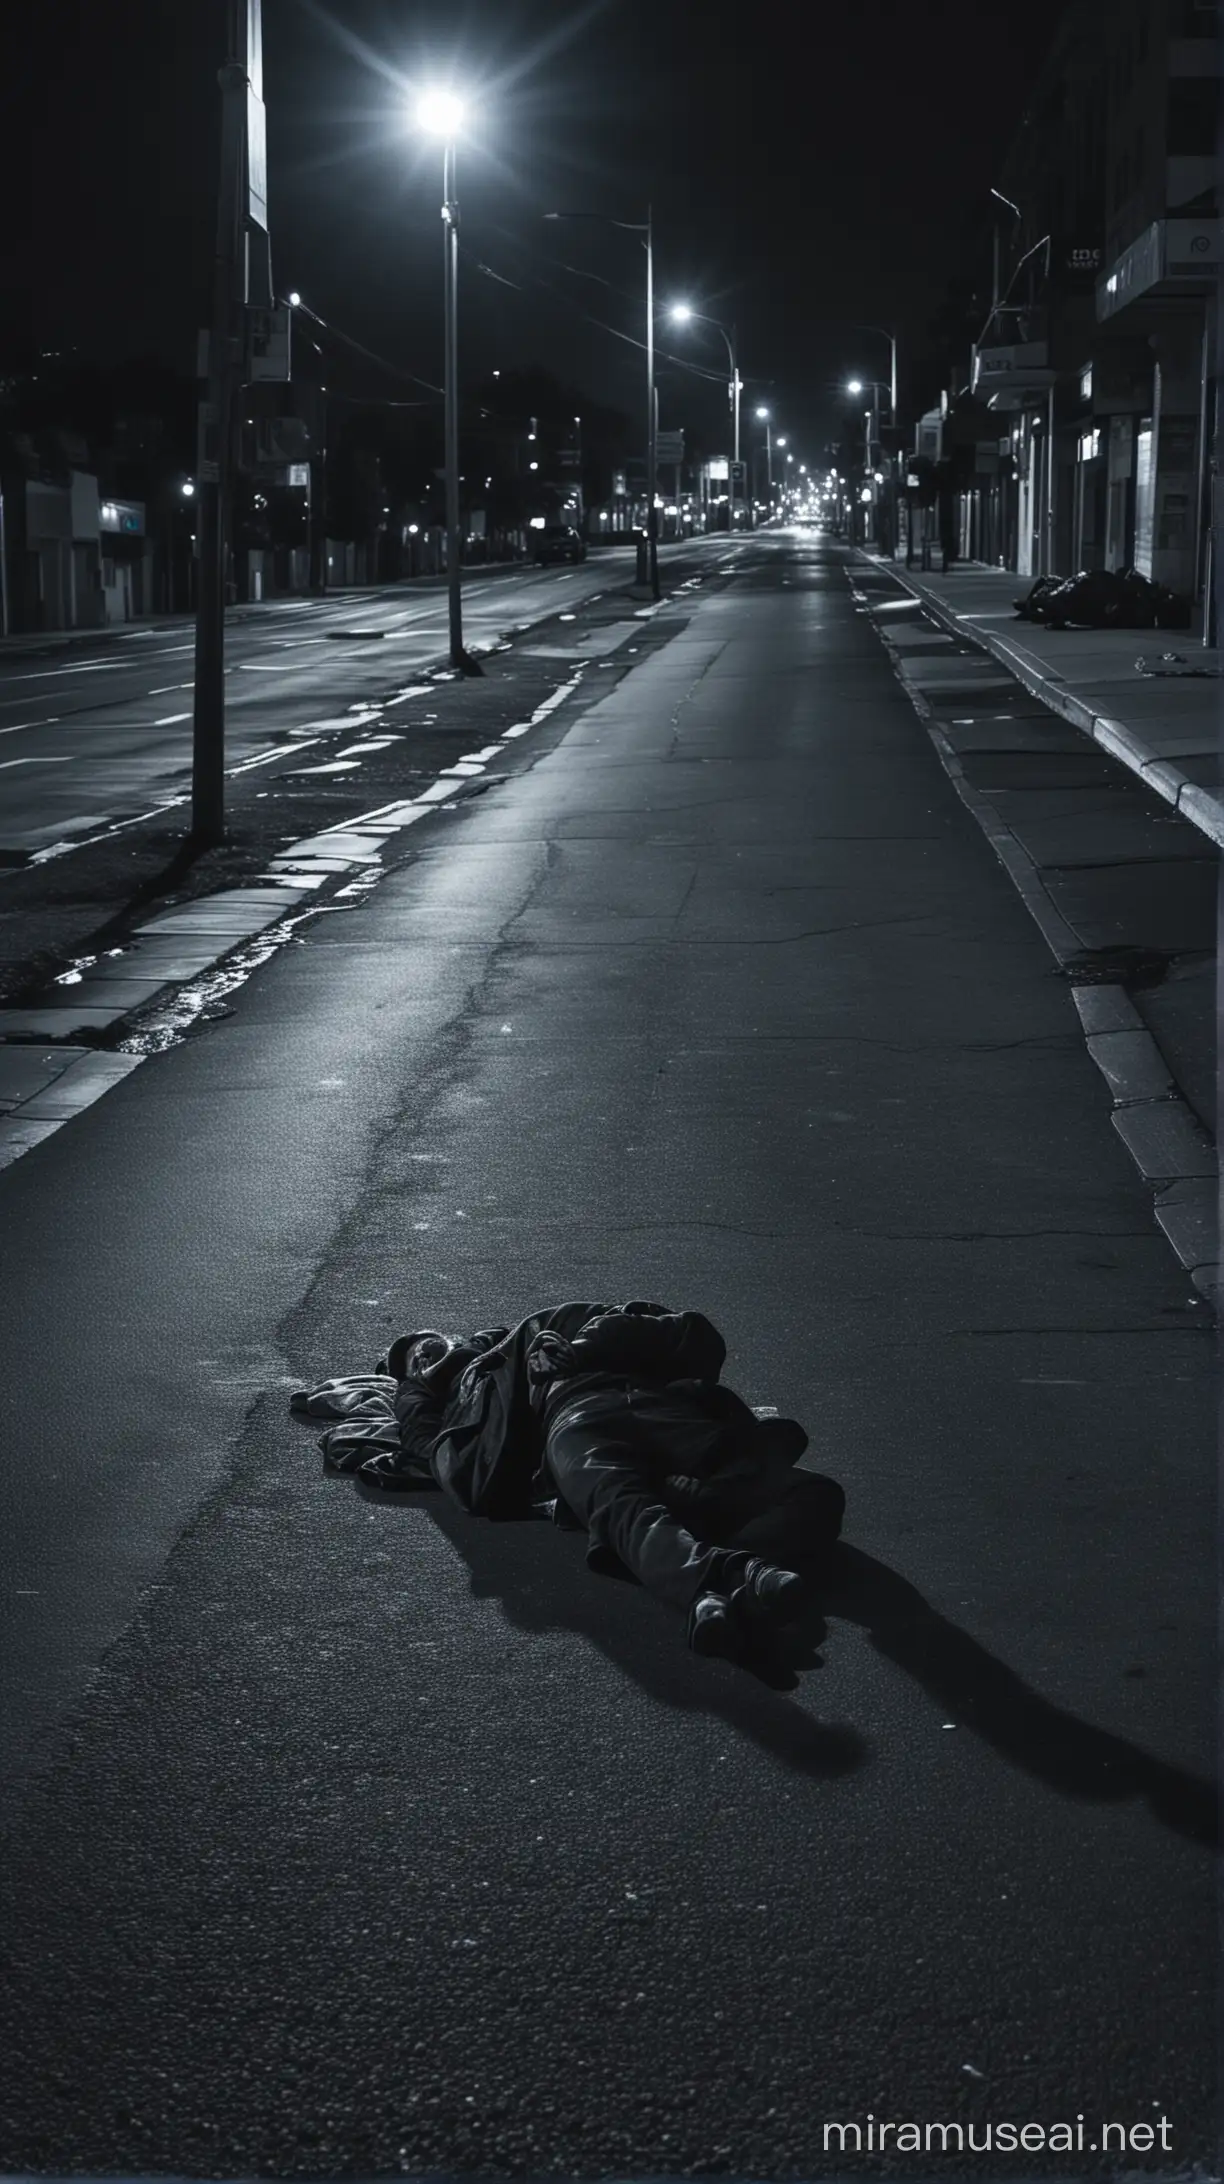 homeless man laying on the side of the road, under a bluish white street light at night